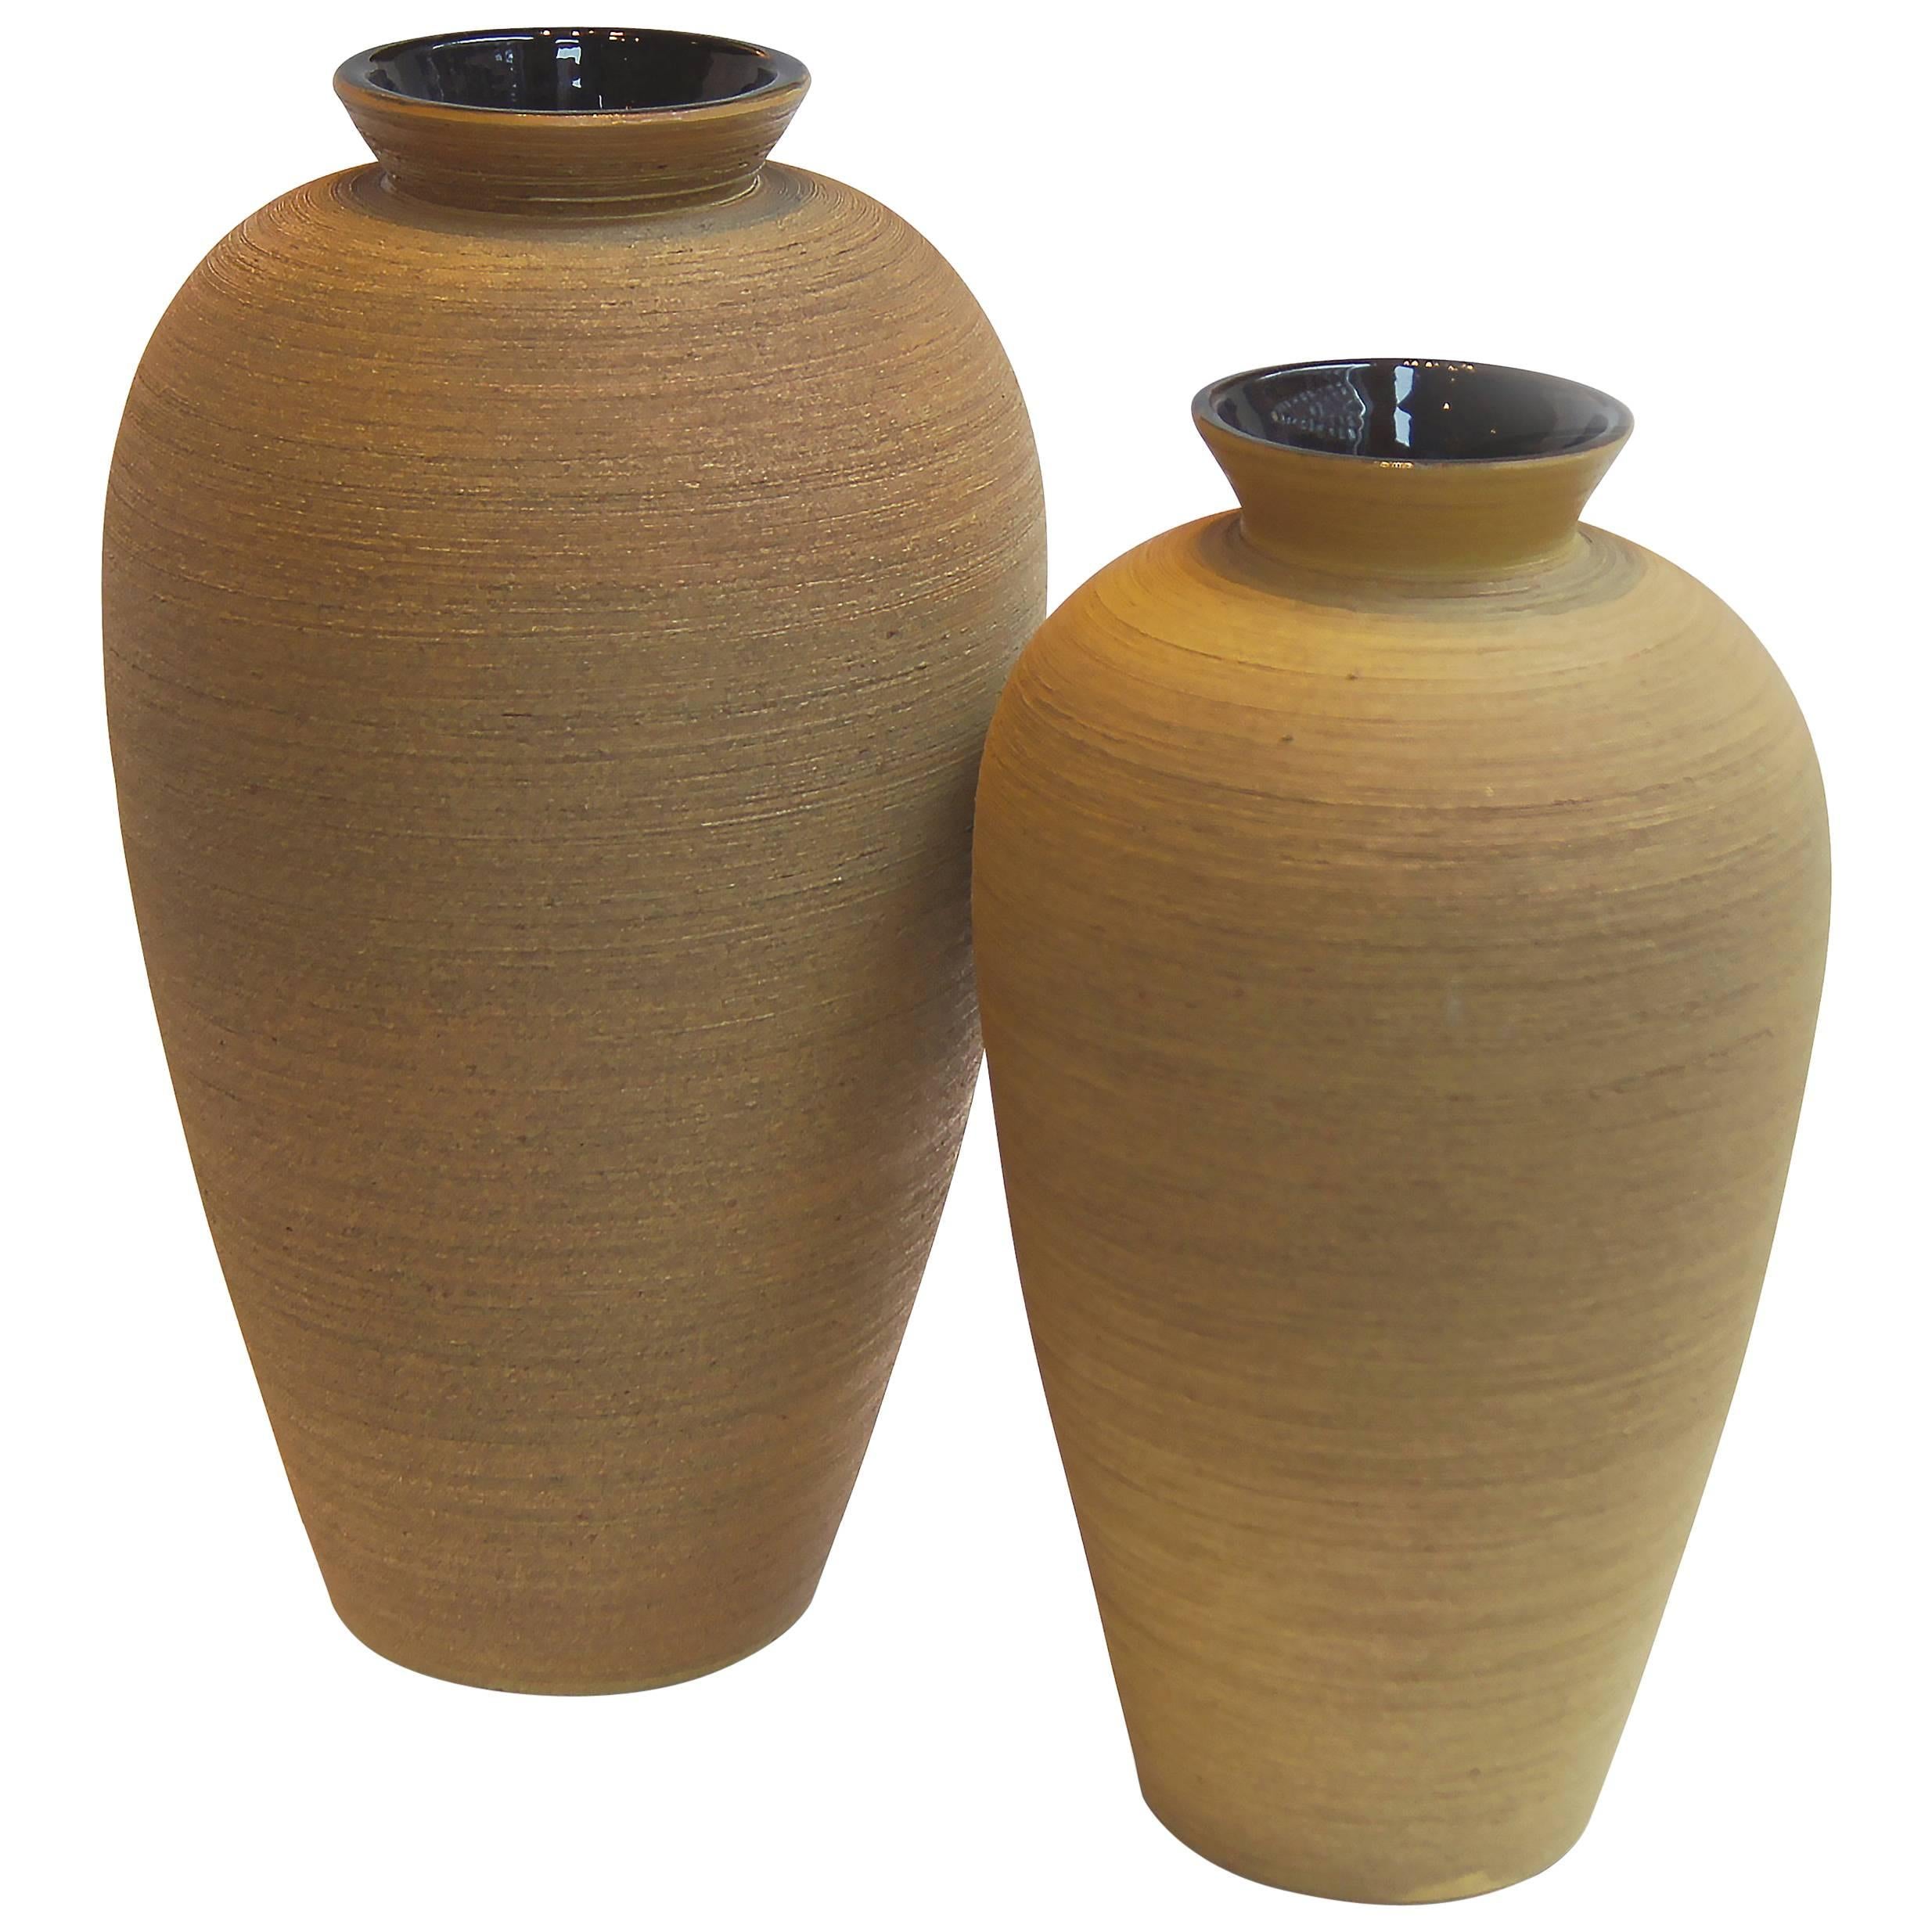 Exceptional Monumental Art Deco Vase Duo in Ochre and Aubergine by Upsala Ekeby For Sale